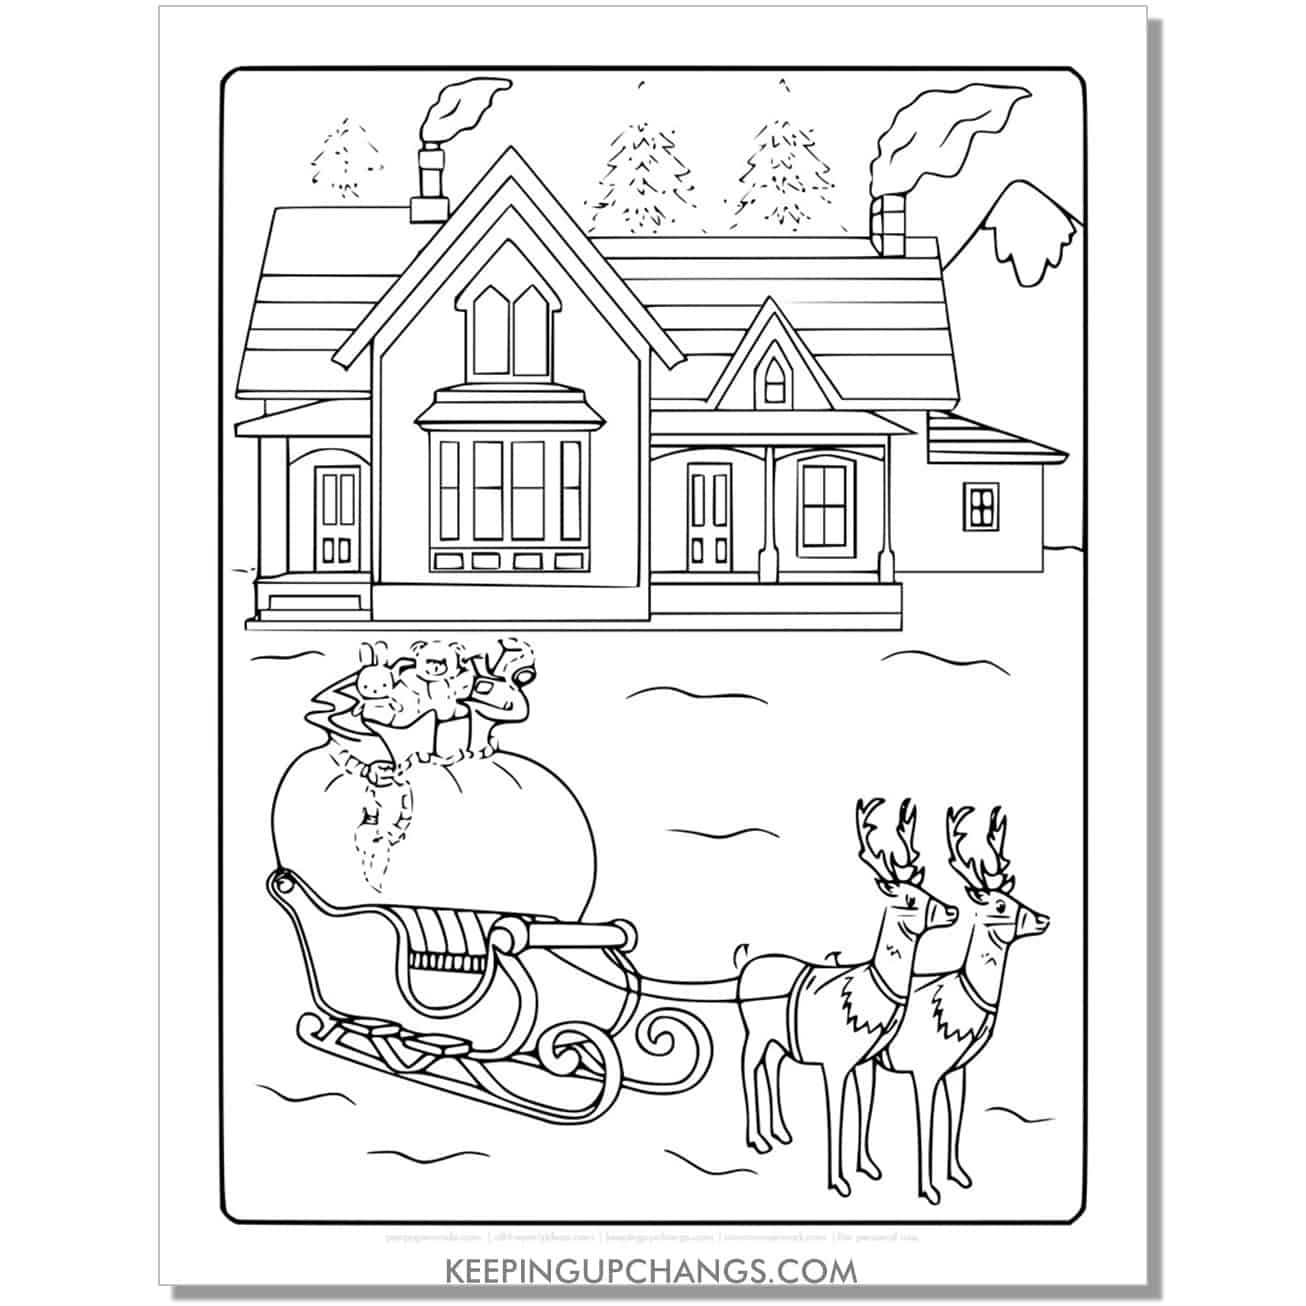 free full size reindeer with sleigh outside house coloring page.